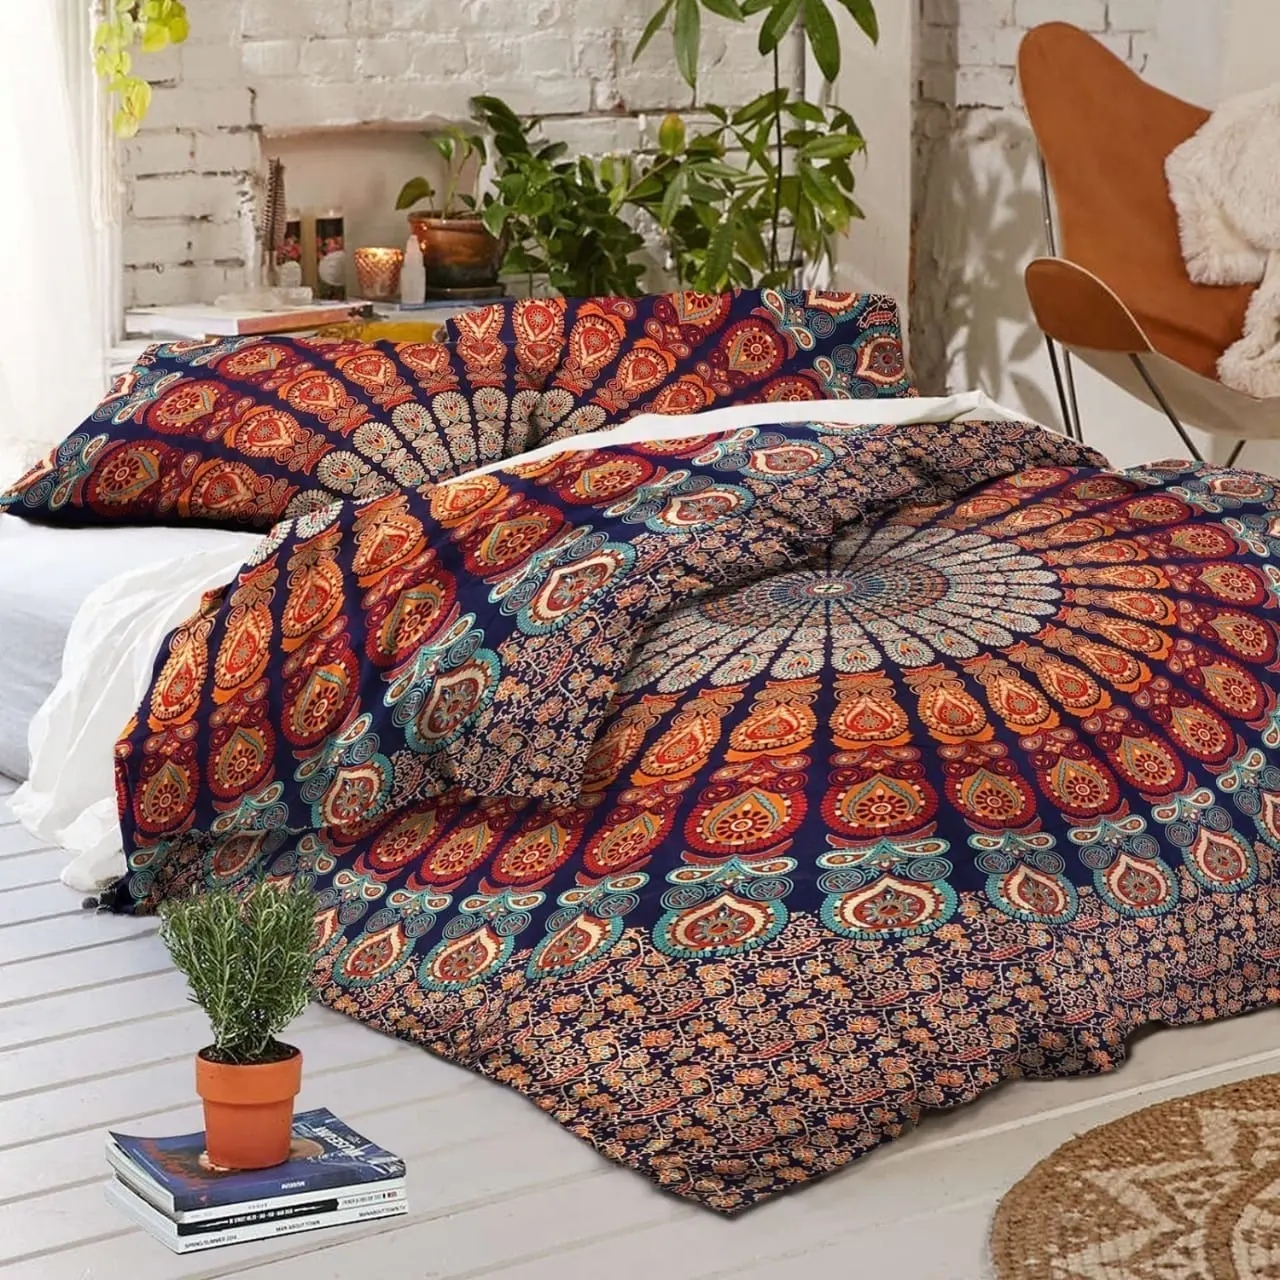 Indian Exclusive eye catching beautiful mandala tapestry bedding with pillow covers fabric cotton Queen Size bed sheet set